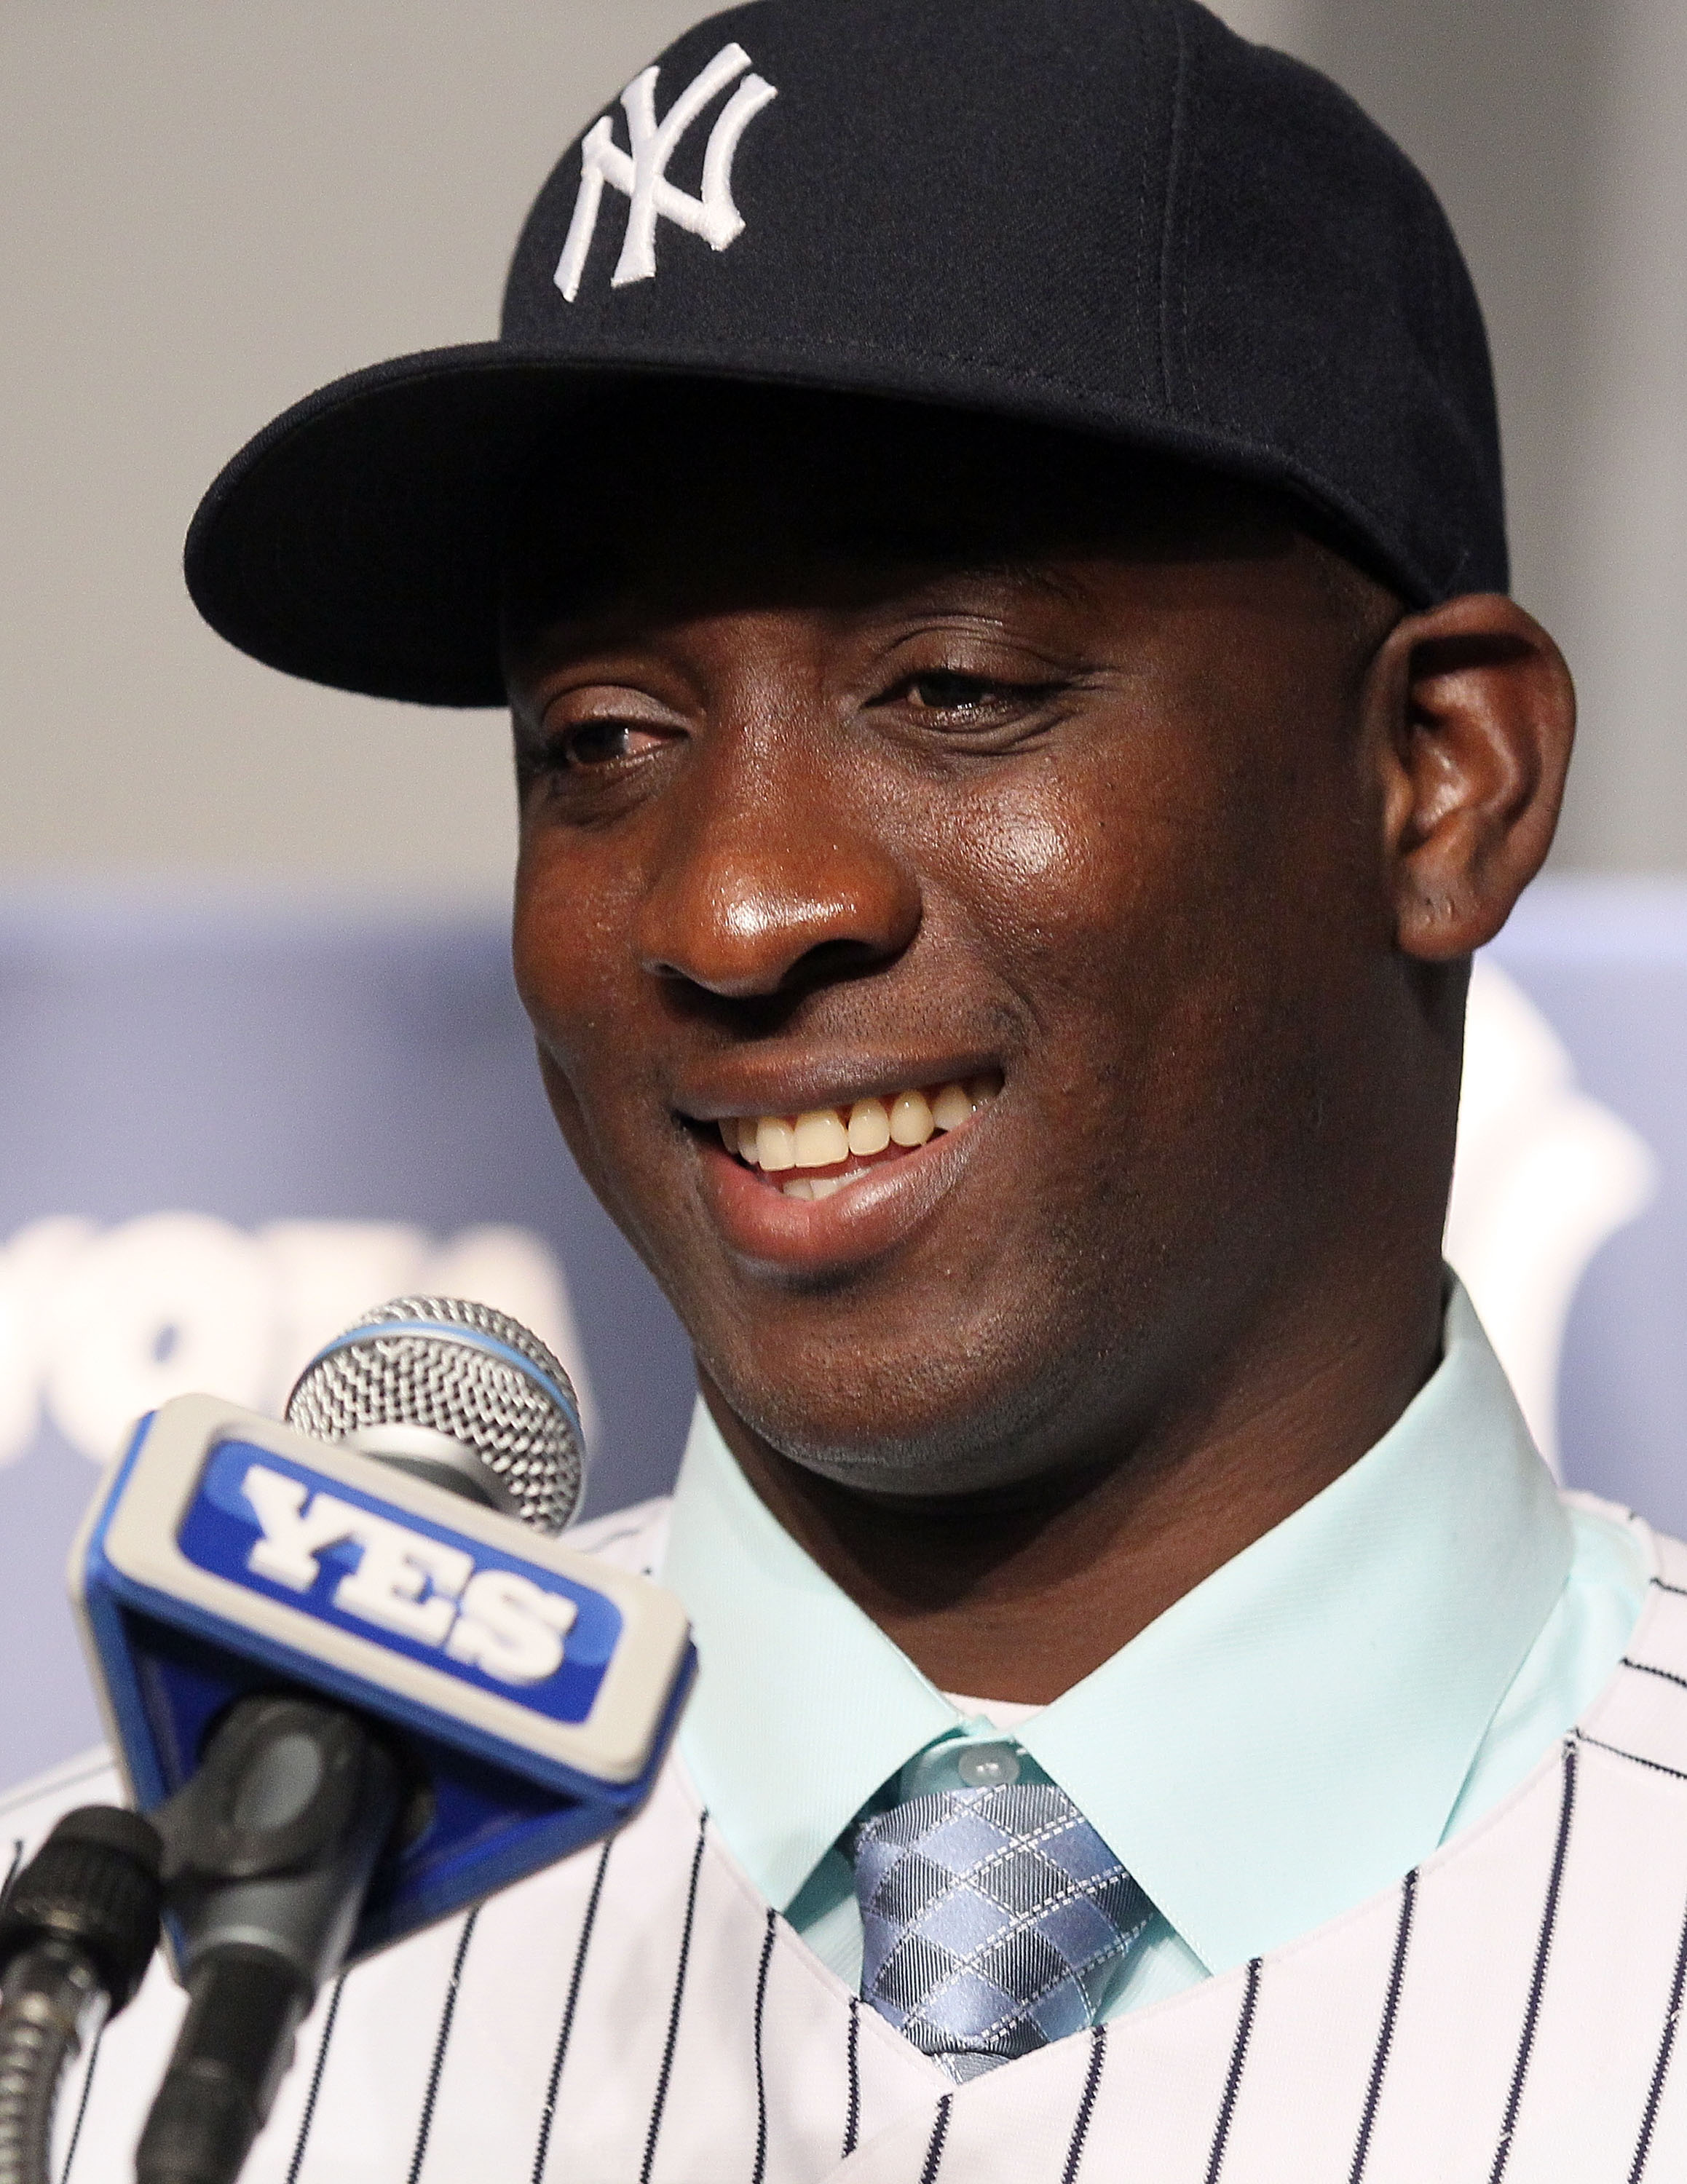 NEW YORK, NY - JANUARY 19:  Rafael Soriano of the New York Yankees speaks during his introduction press conference on January 19, 2011 at Yankee Stadium in the Bronx borough of New York City. The Yankees signed Soriano to a three year contract.  (Photo by